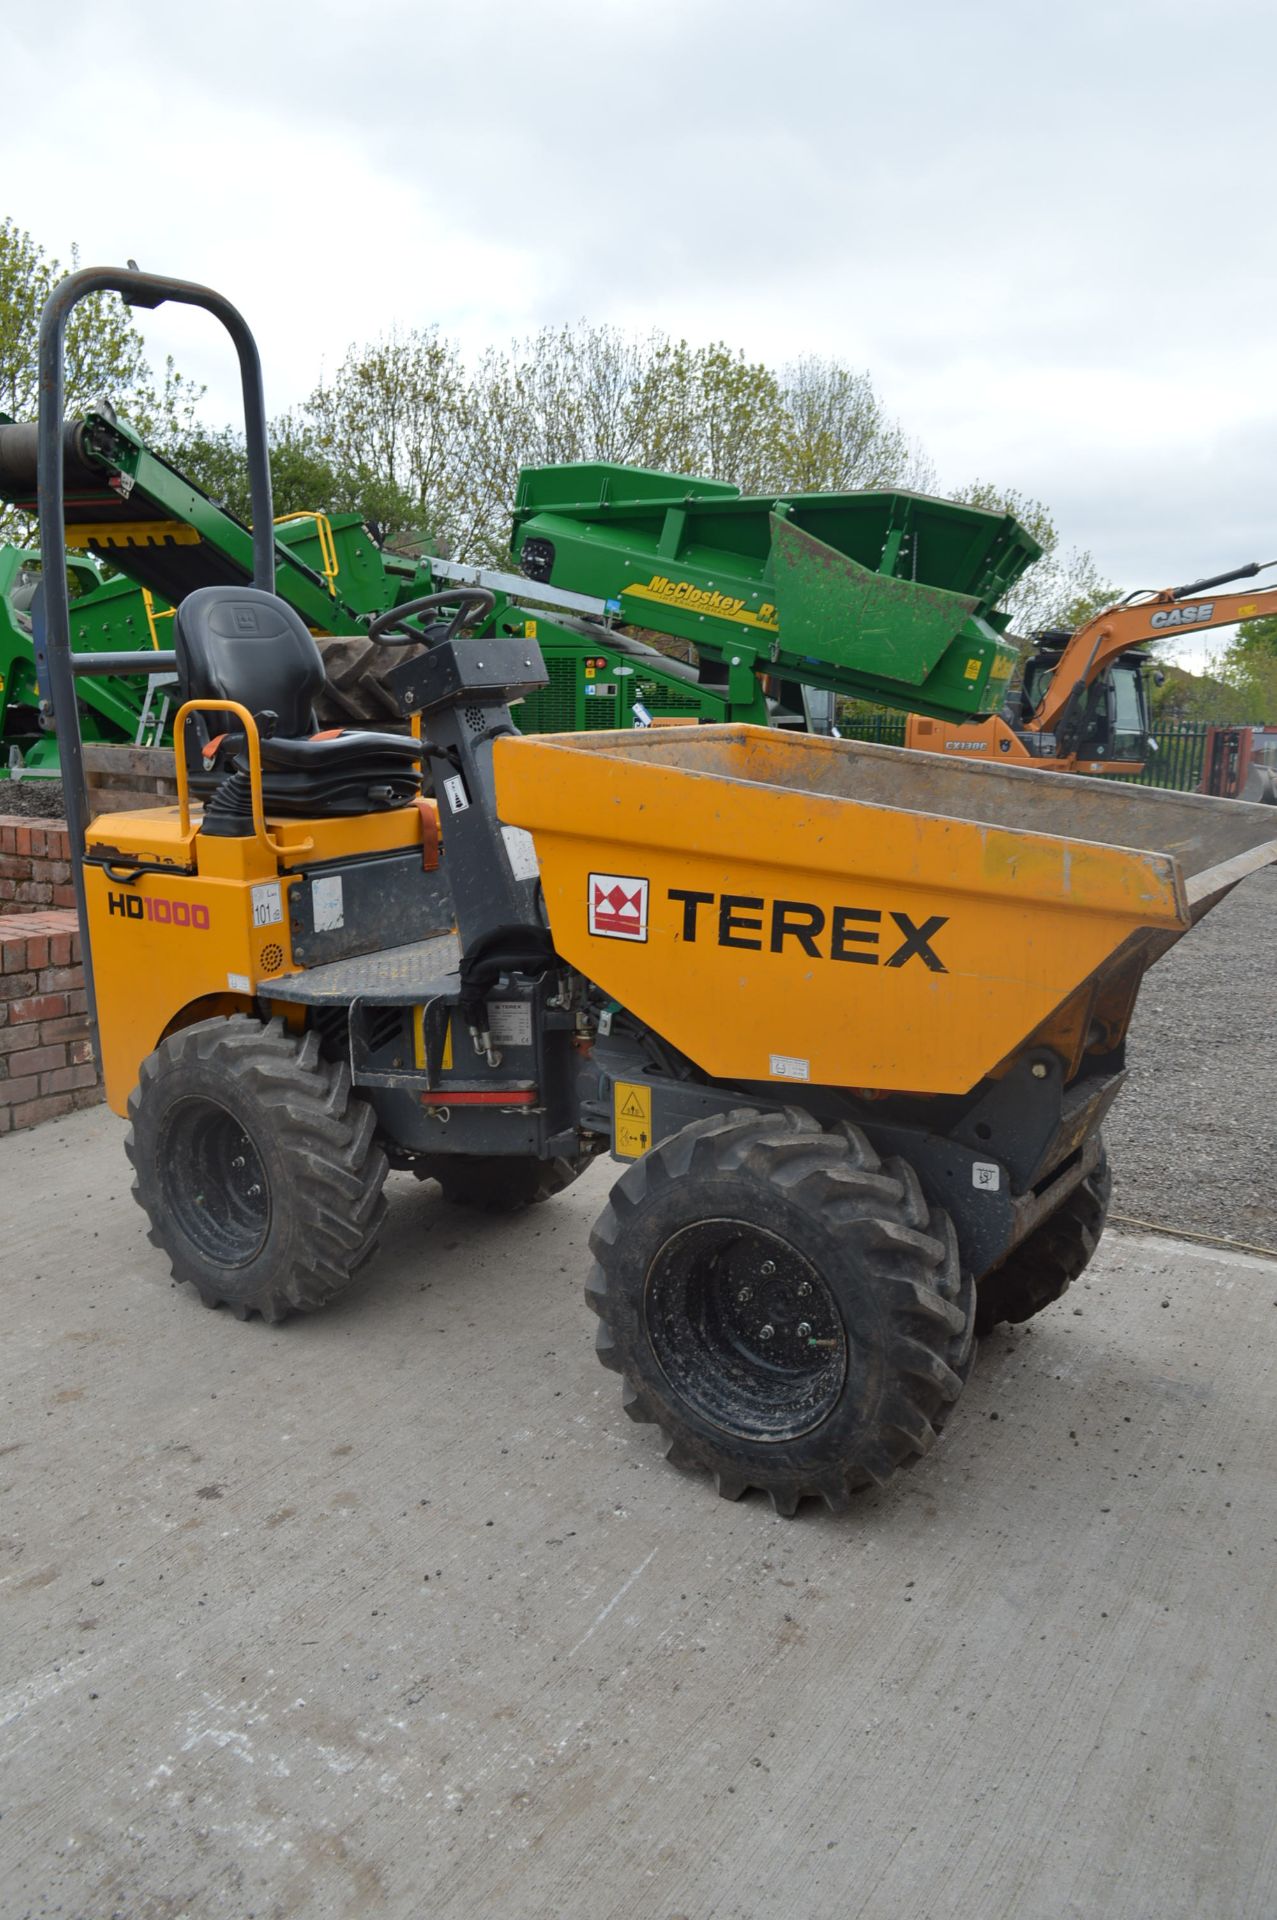 Terex HD1000 HIGH LIFT 4WD MINI DUMPER, VIN SLBDRPK0EC1NW1433, year of manufacture 2012, indicated - Image 3 of 5